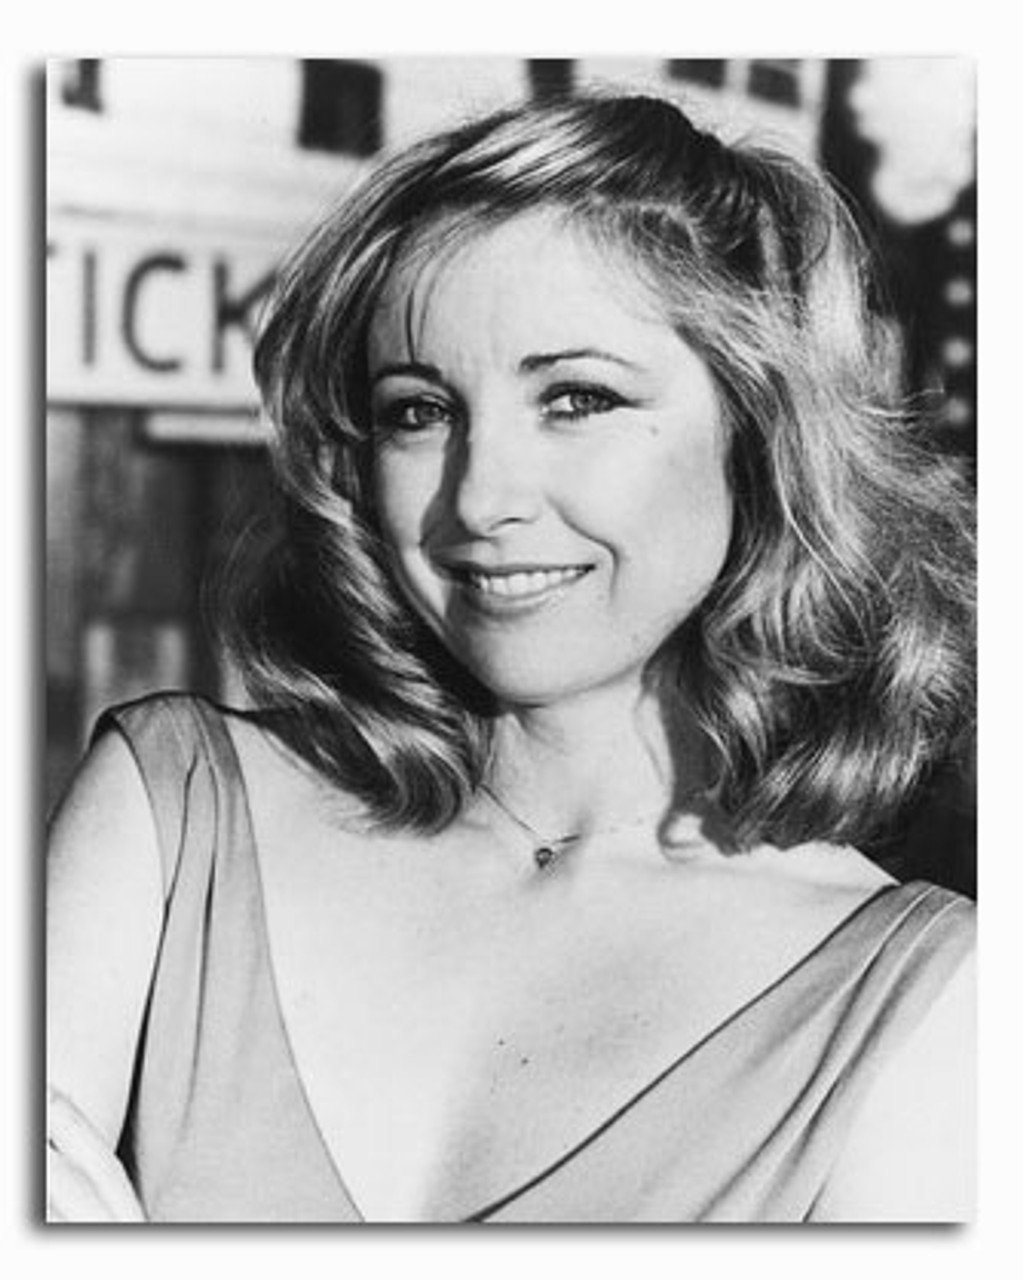 SS2321878) Movie picture of Teri Garr buy celebrity photo and posters at Starstills.com